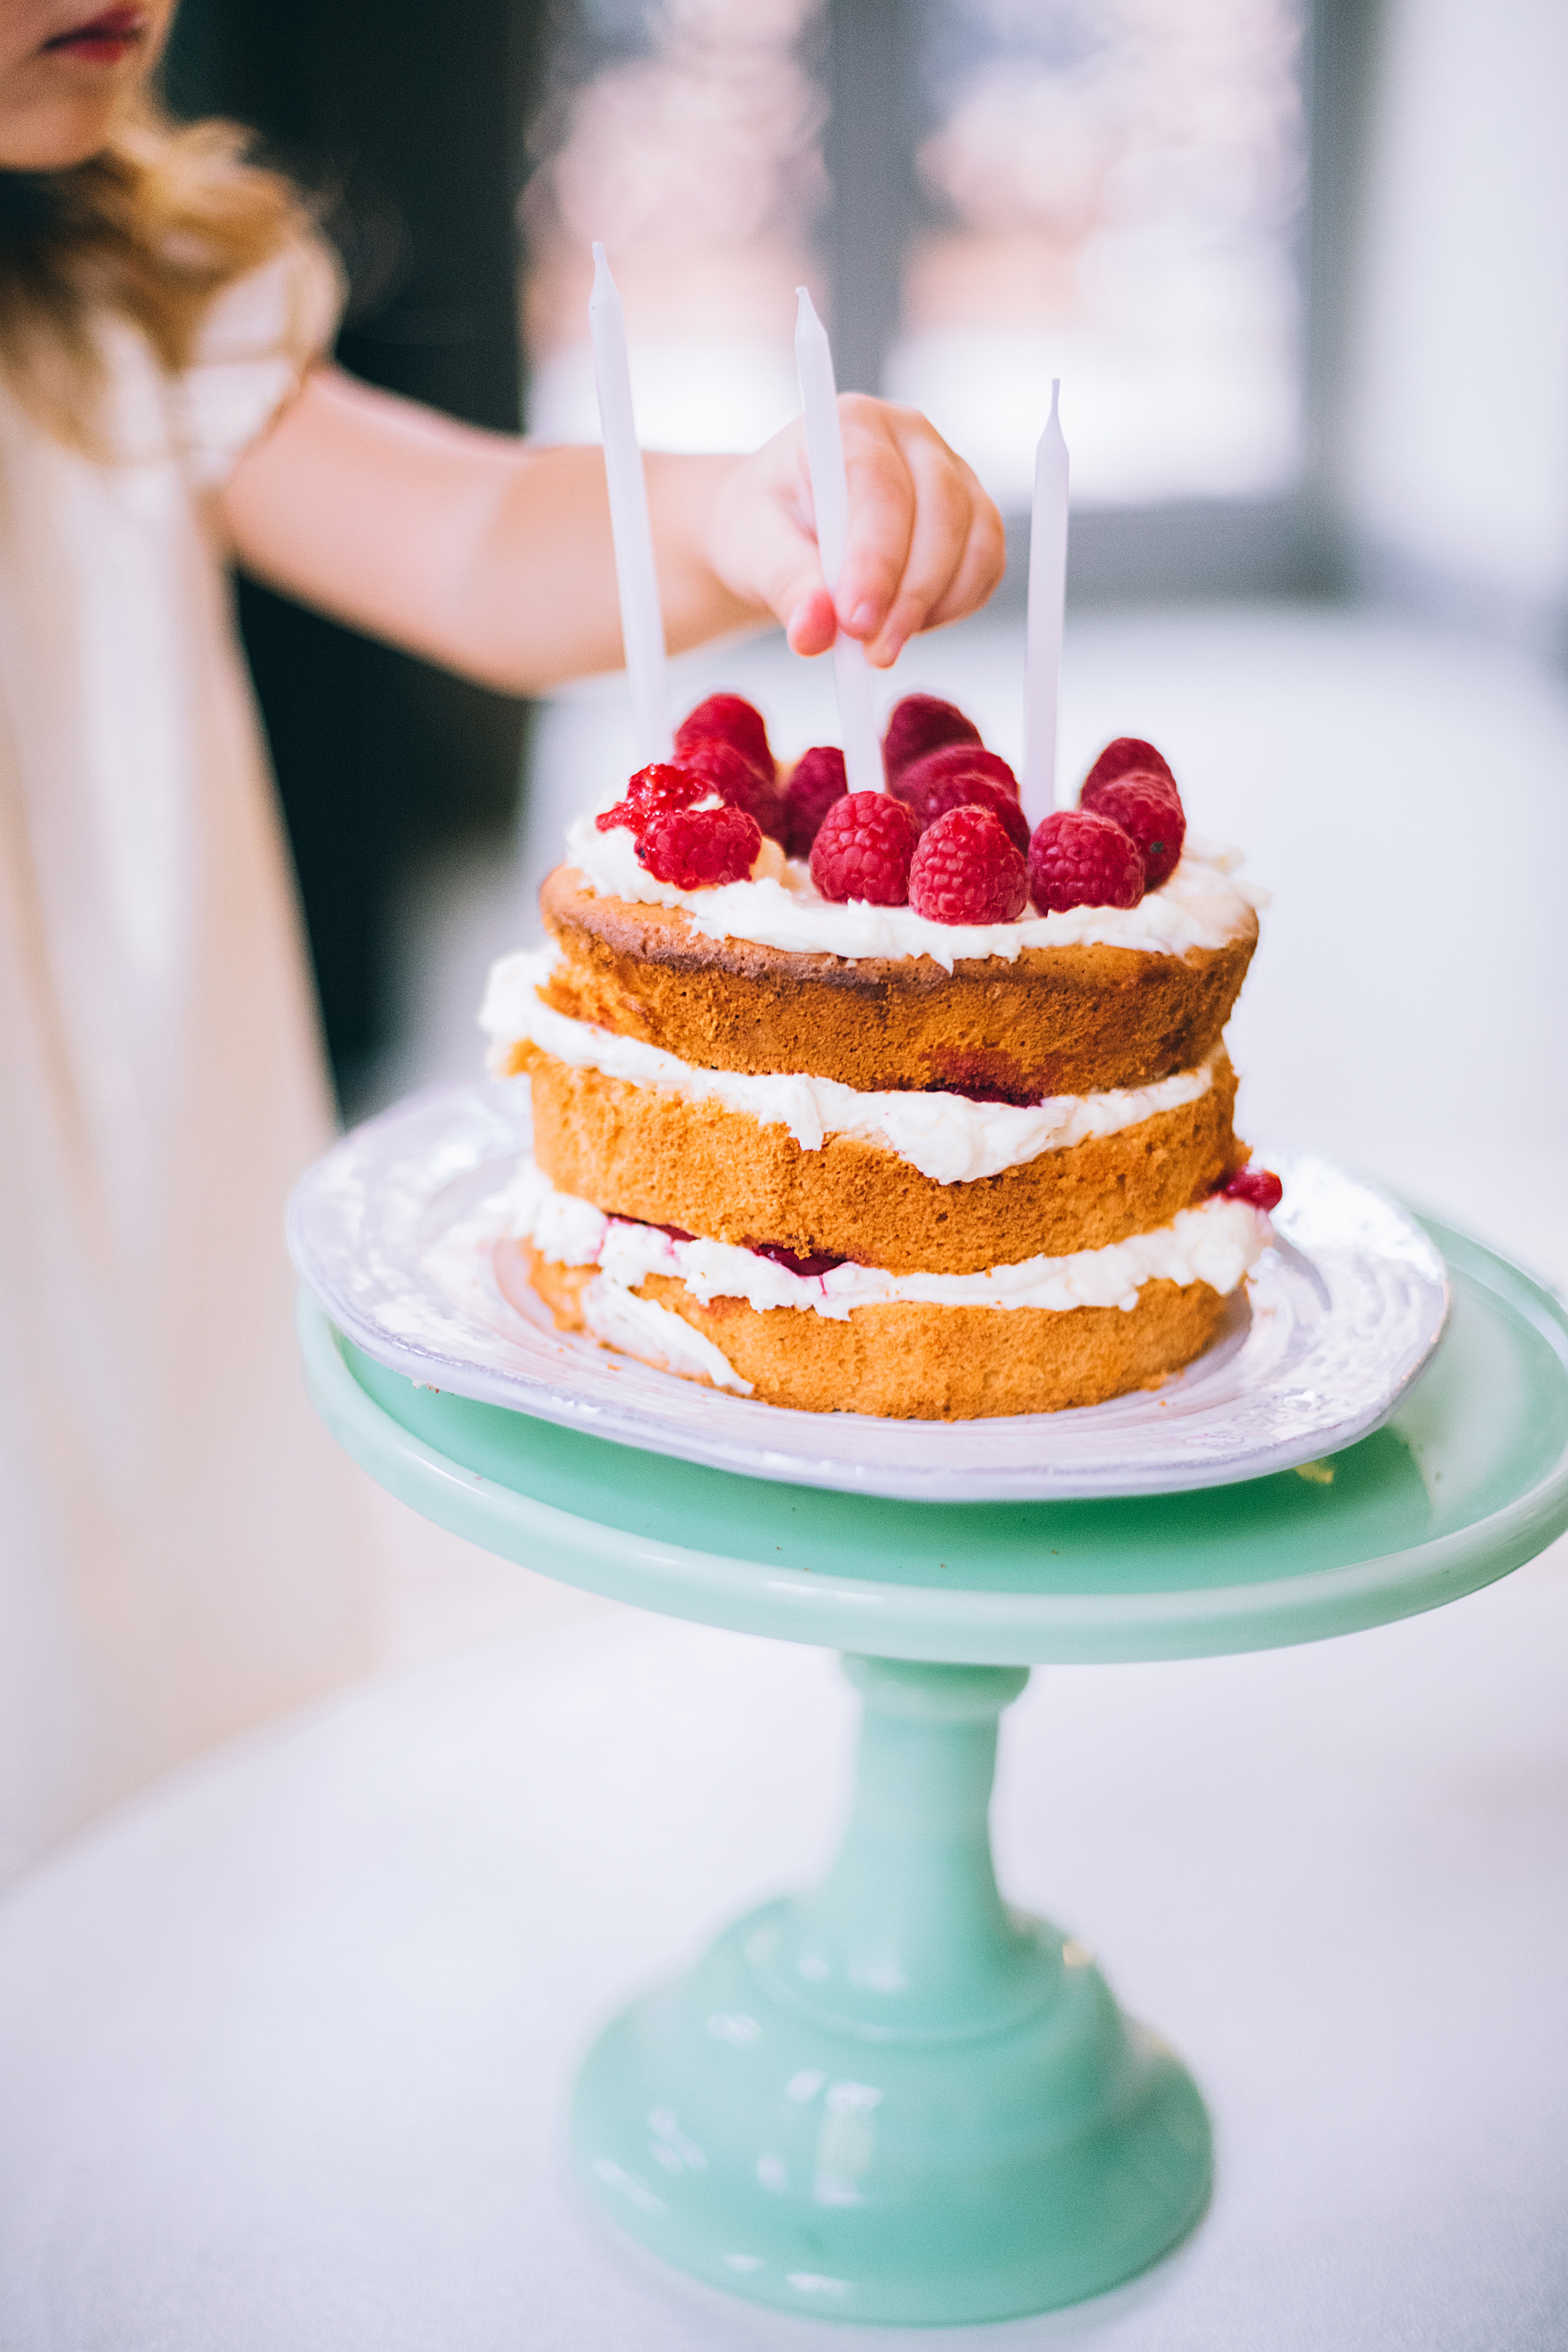 Girl Putting a Candle on 3-layered Cake, Baked, Food, Plate, Pastry, HQ Photo